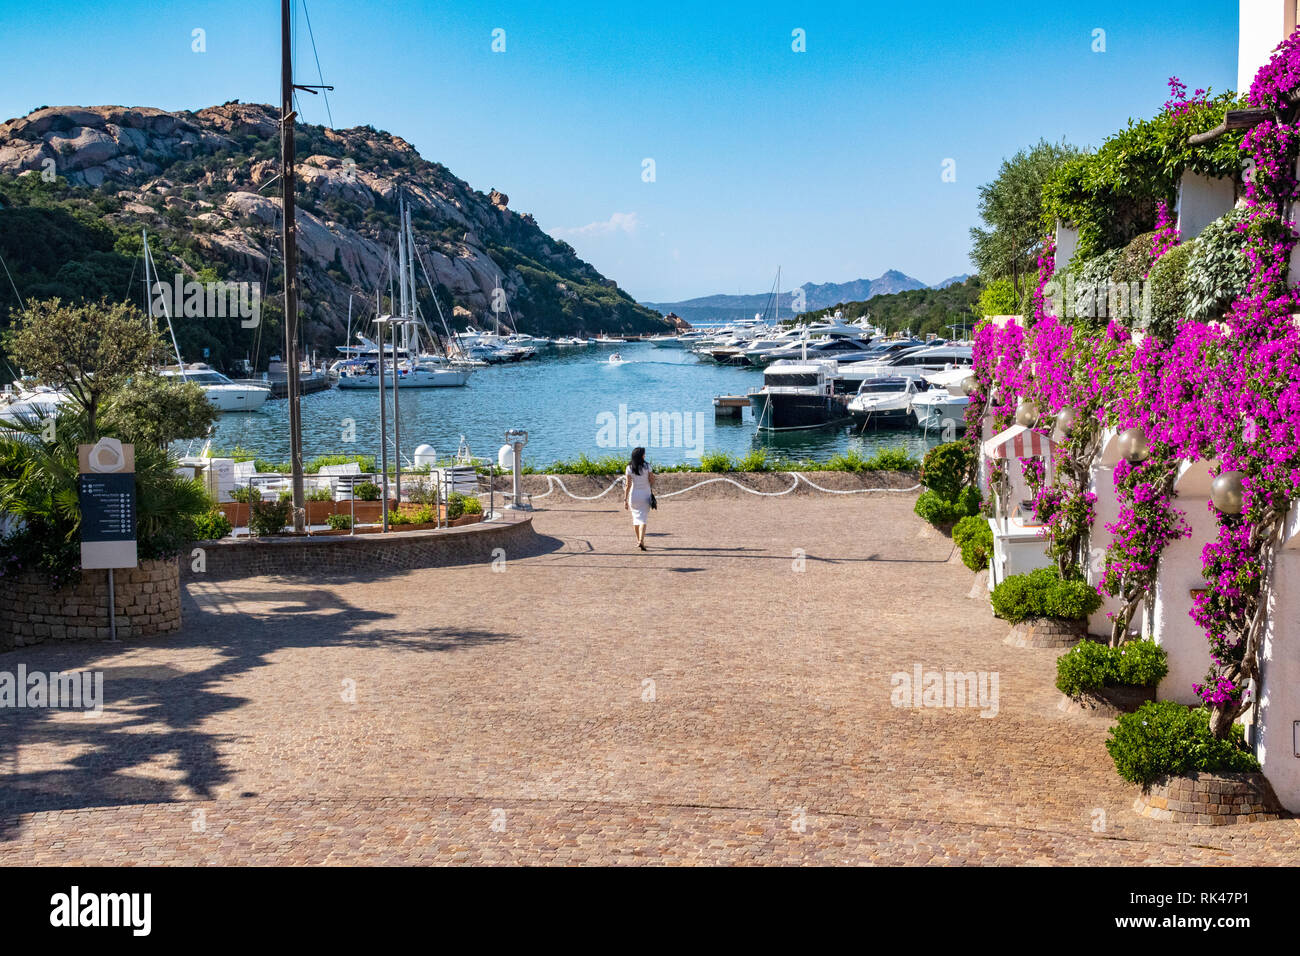 Quayside View With a Woman Looking Out from the Hotel at Moored Boats and the Landscape at Marina dell' Orso di Poltu Quatu. Stock Photo